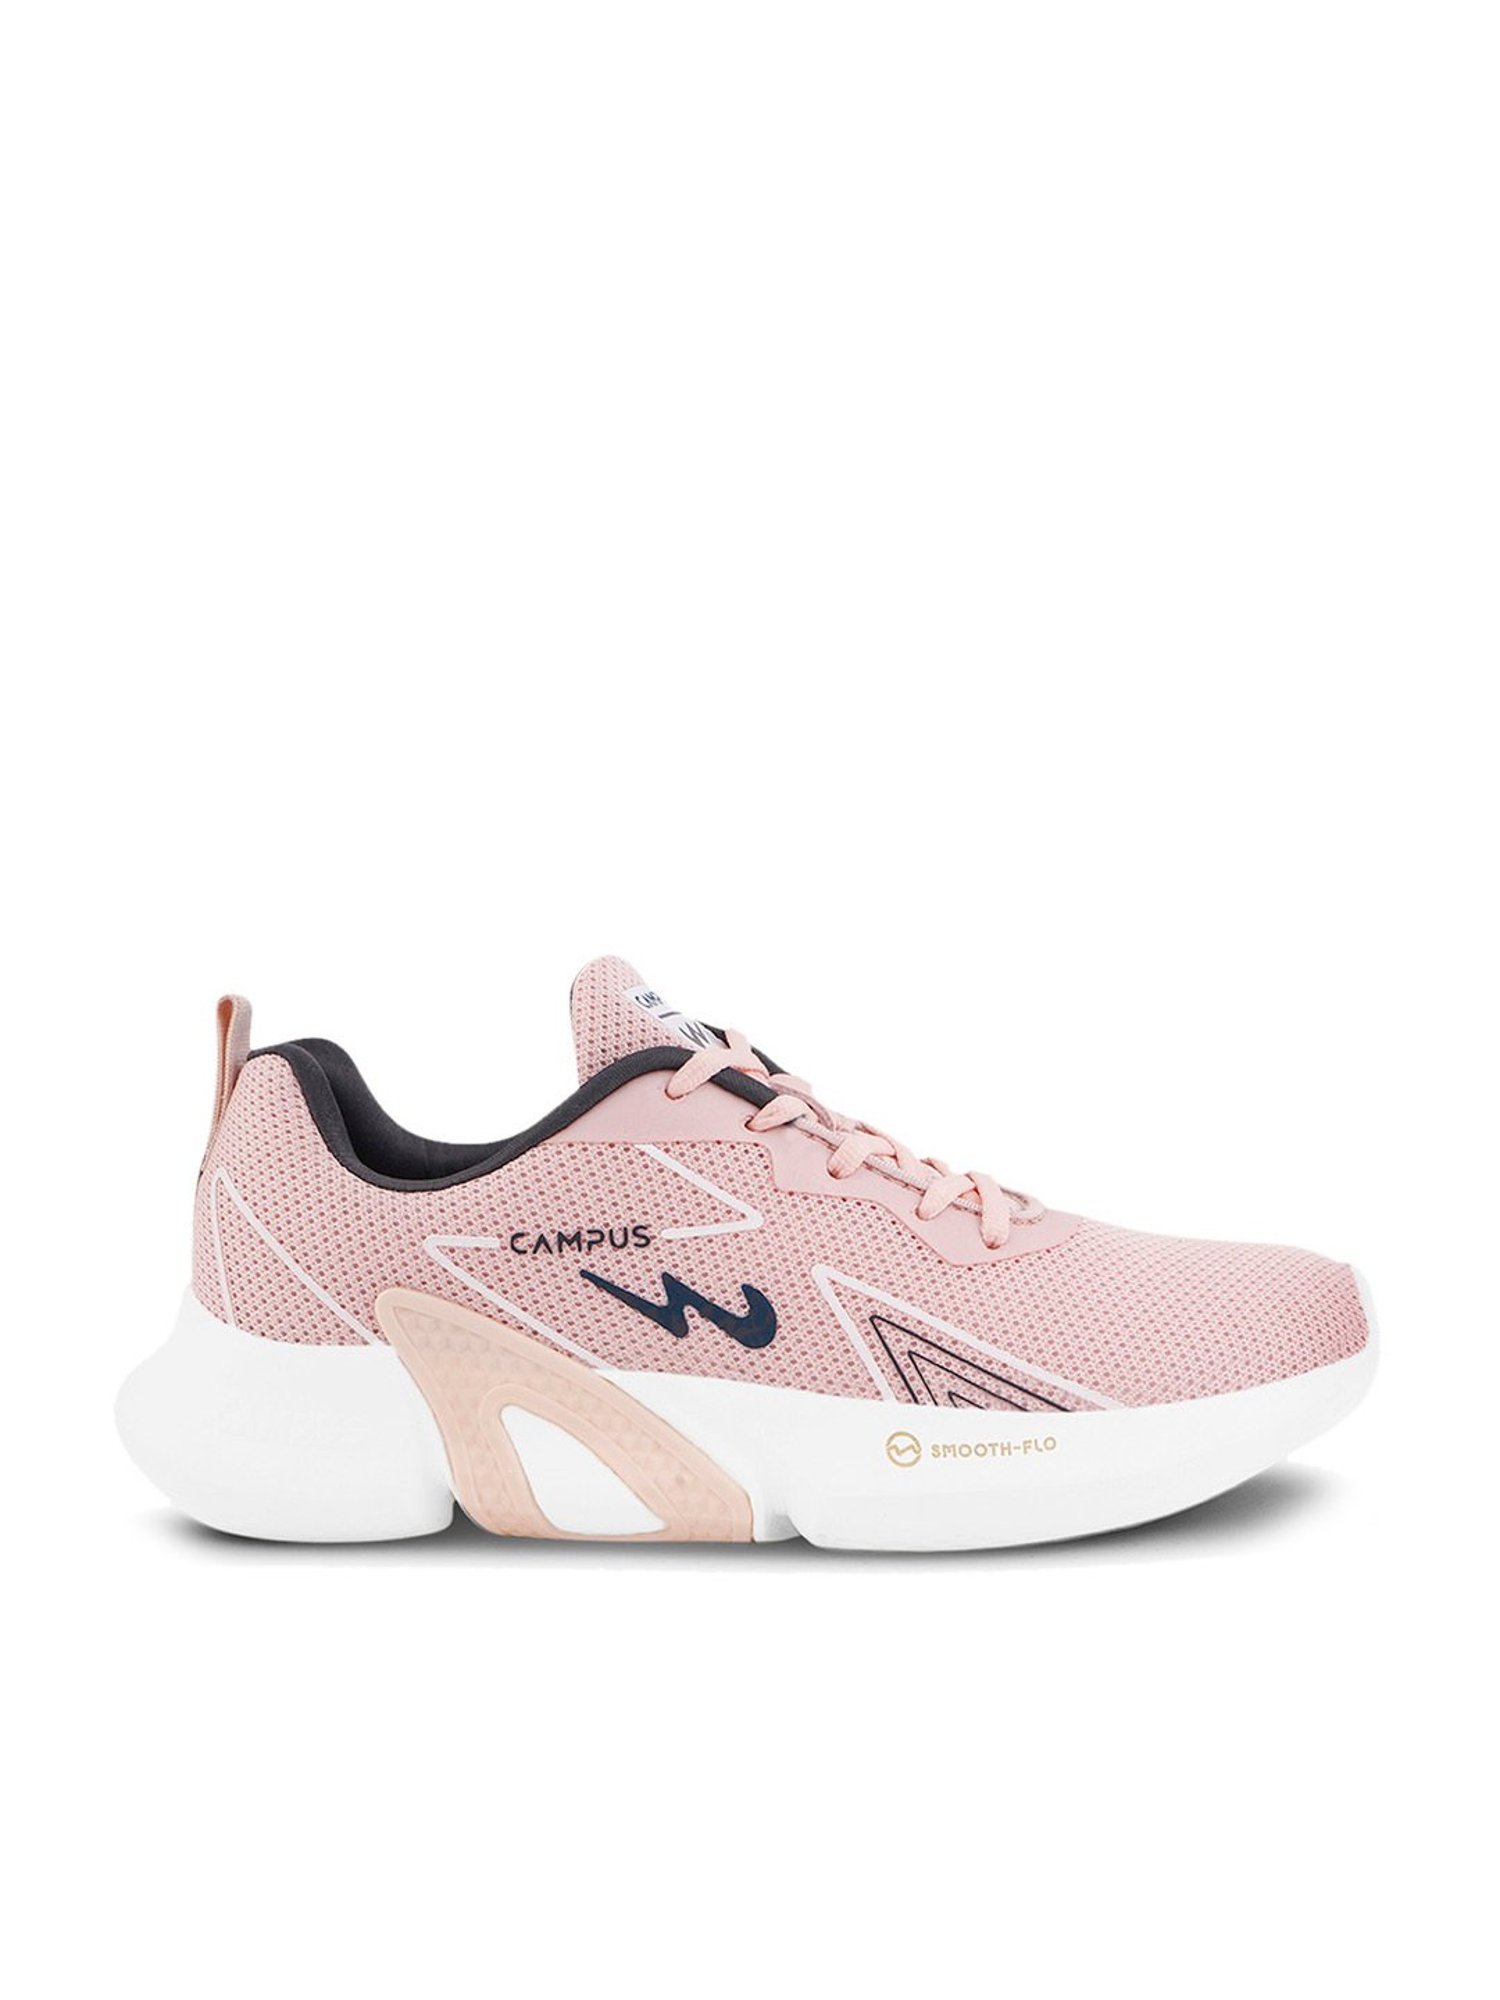 Buy Campus Women's Peach Running Shoes for Women at Best Price